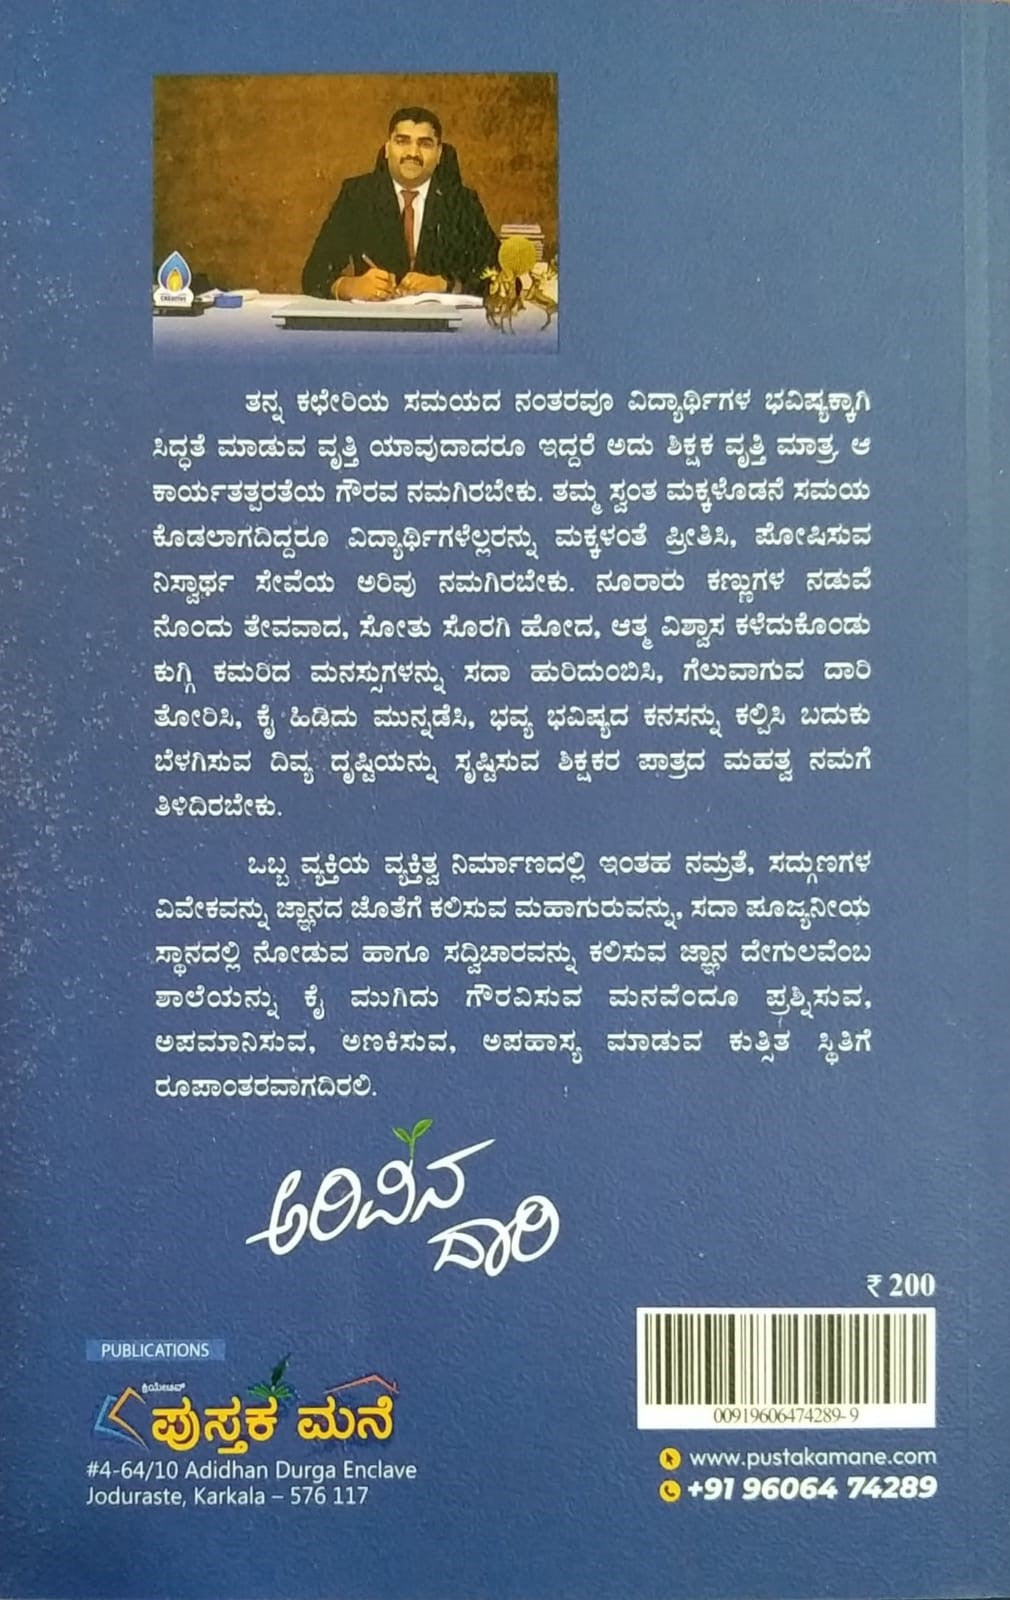 'Arivina Daari' is a Book of Personality Development which is written by Ashwat. S. L . and Published by Pustaka Mane